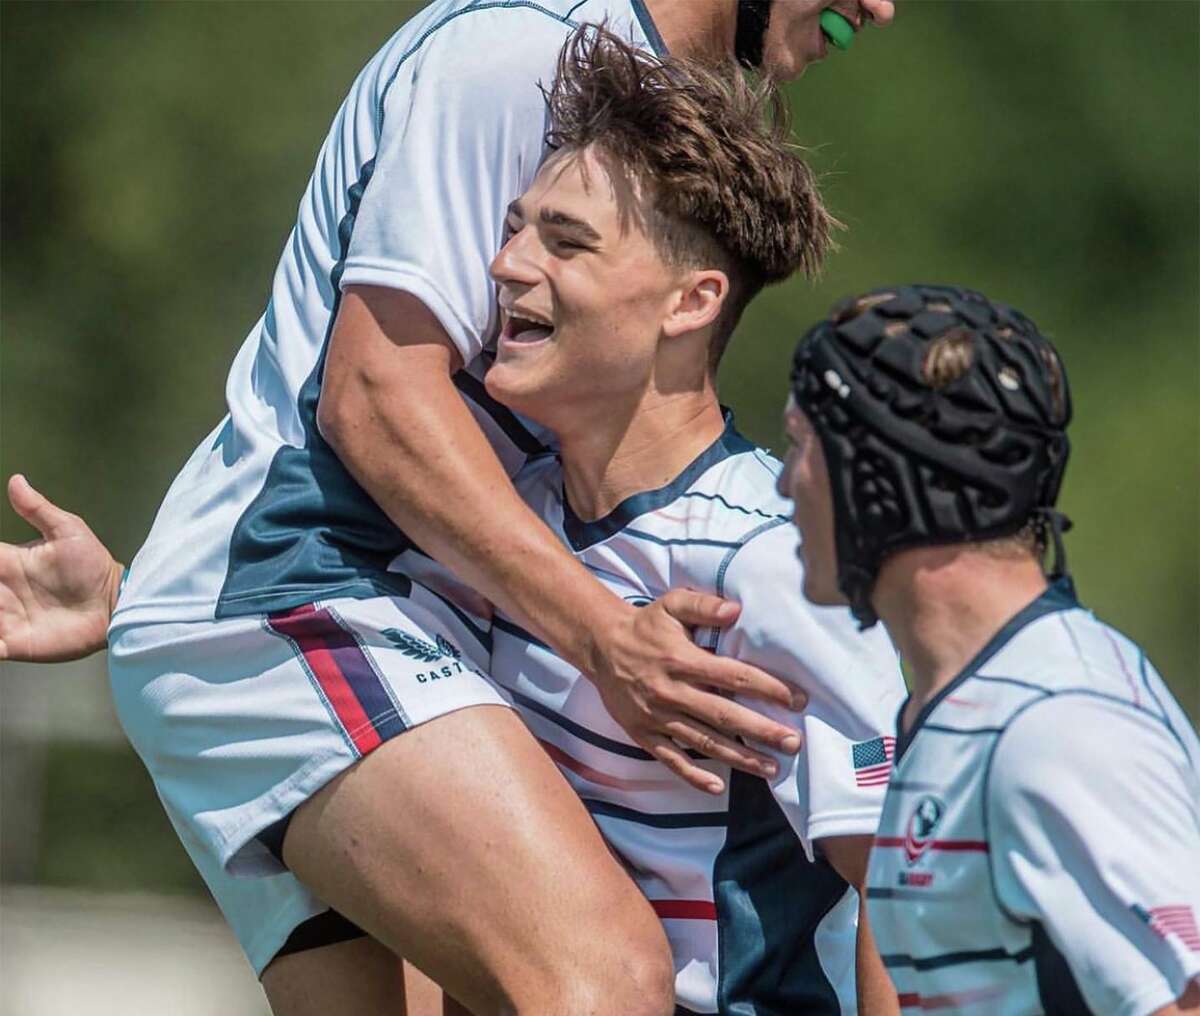 Trumbull’s Corbin Smith and his teammates on the USA U-18 rugby team celebrate during their win over Belgium on the Corendon Tour in Amsterdam on July 16.